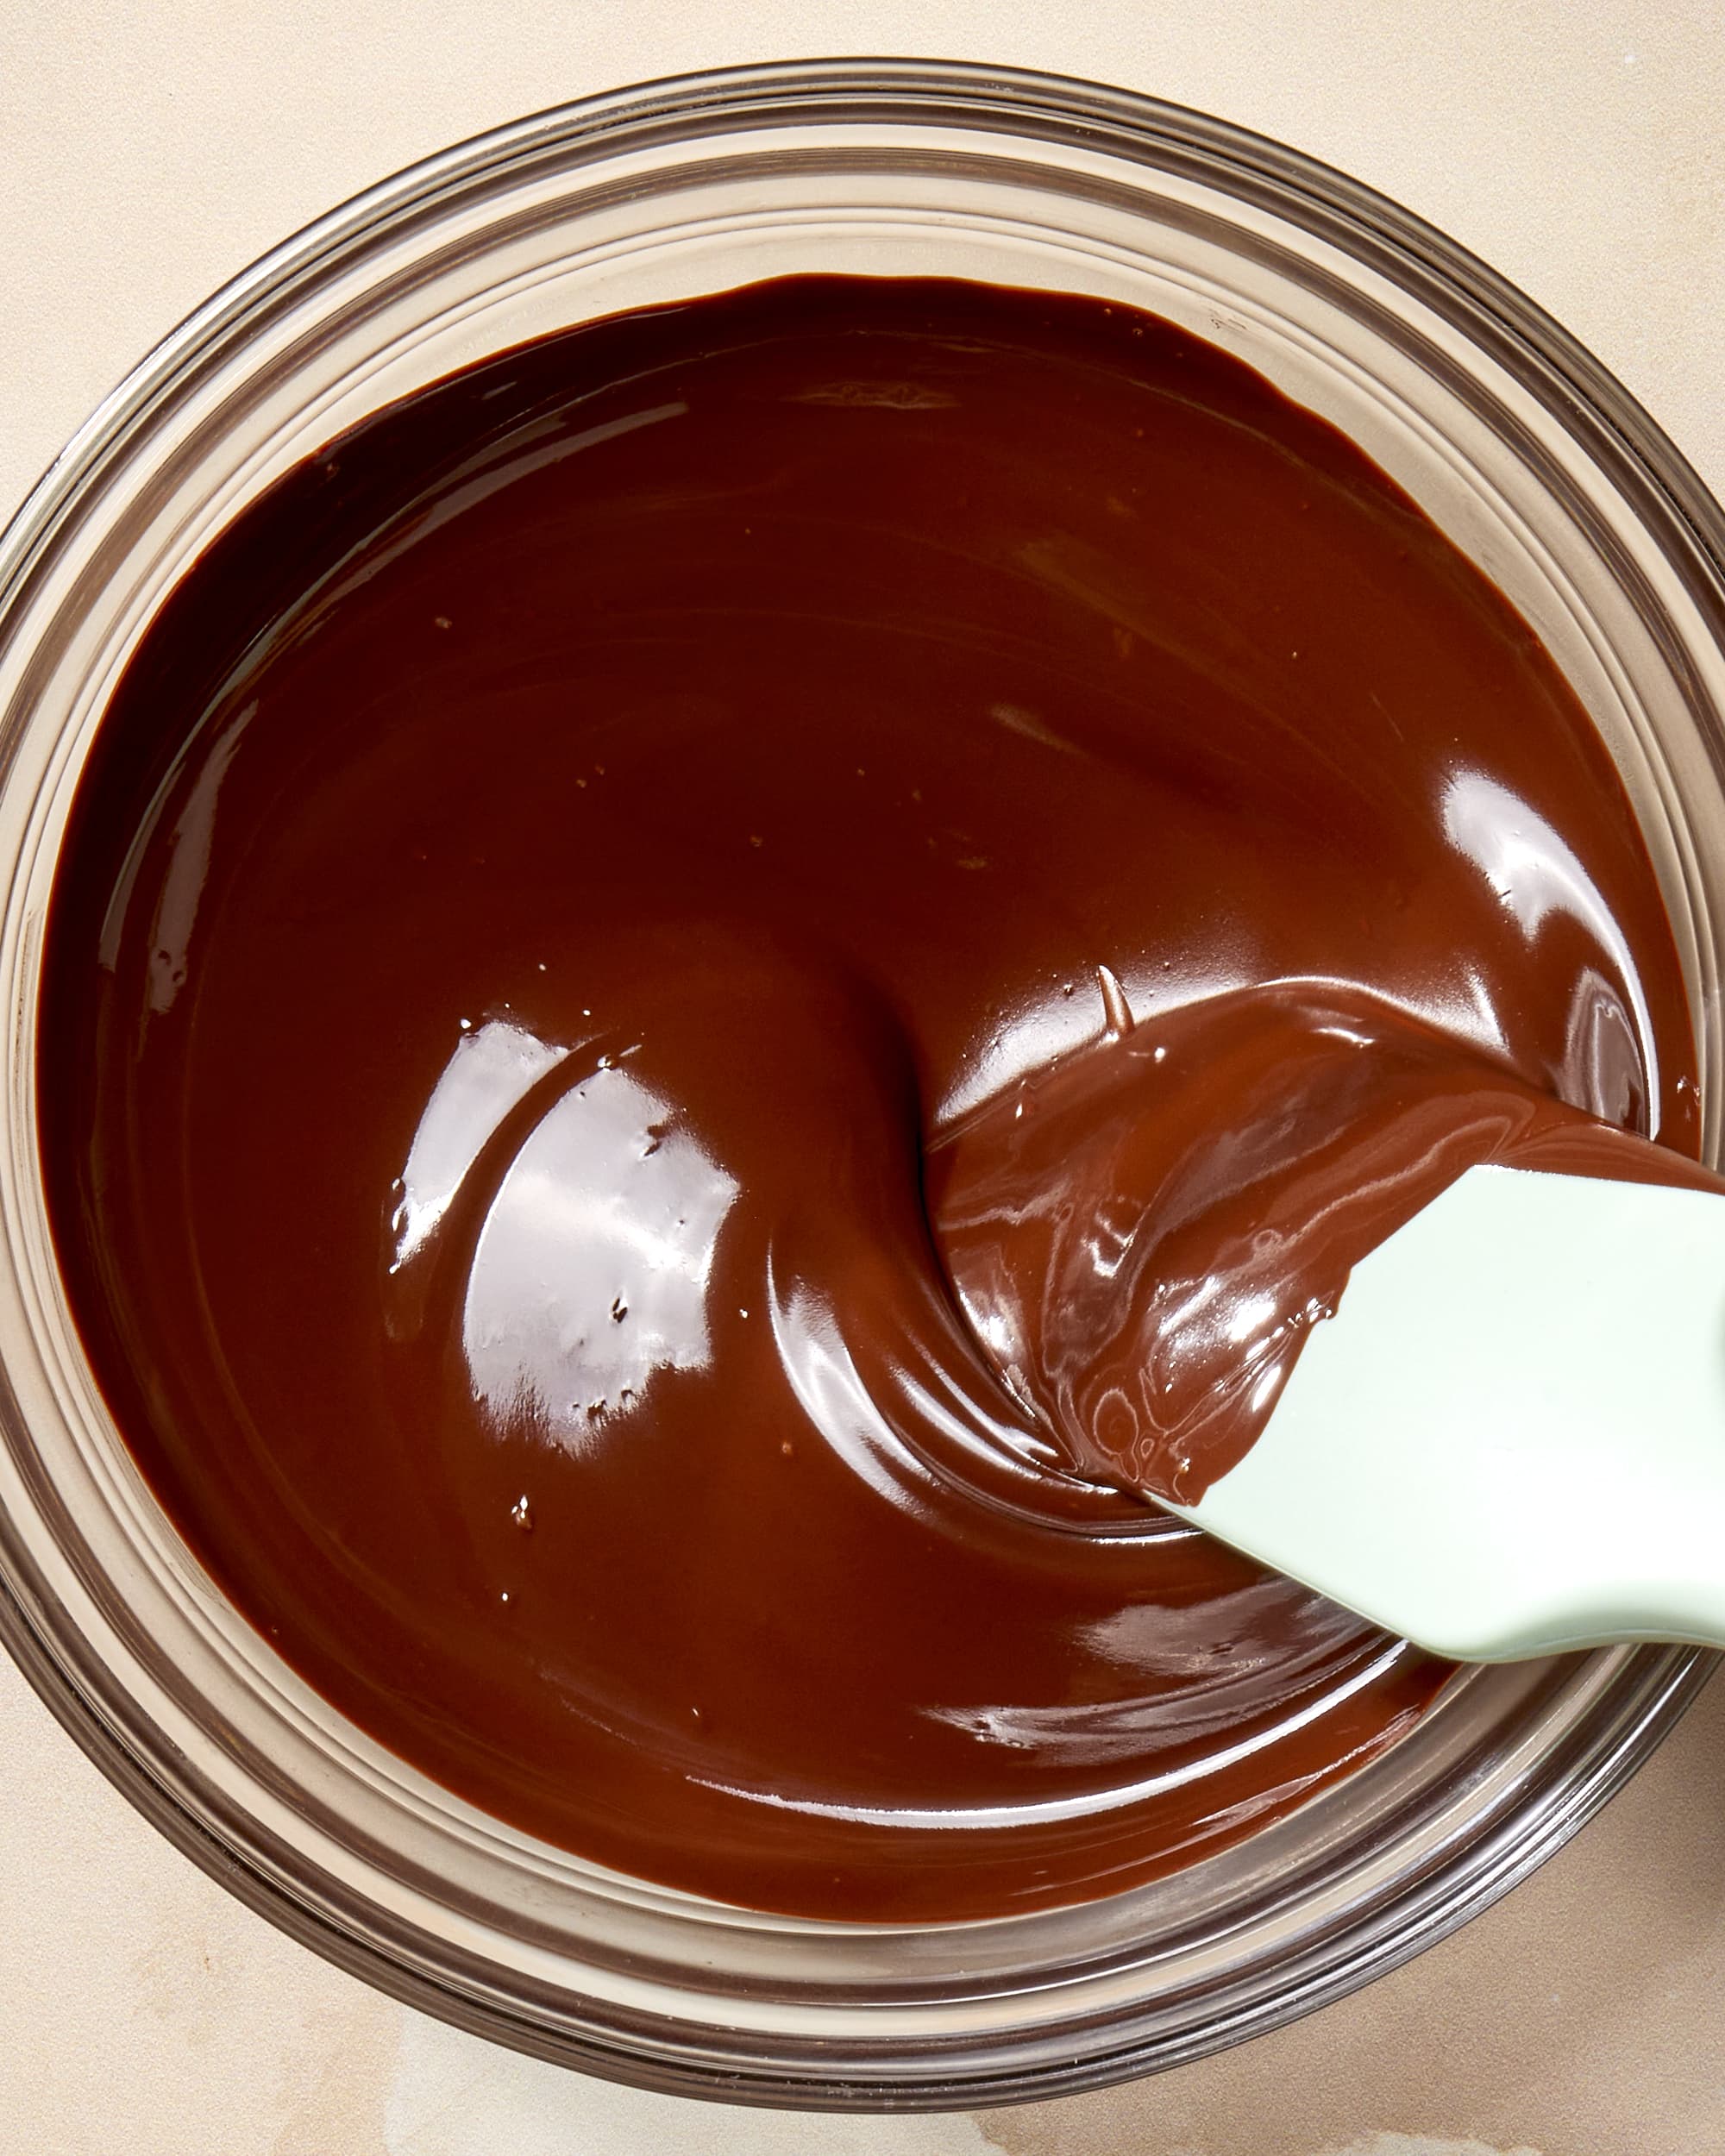 This is why you should avoid melting chocolate in the microwave